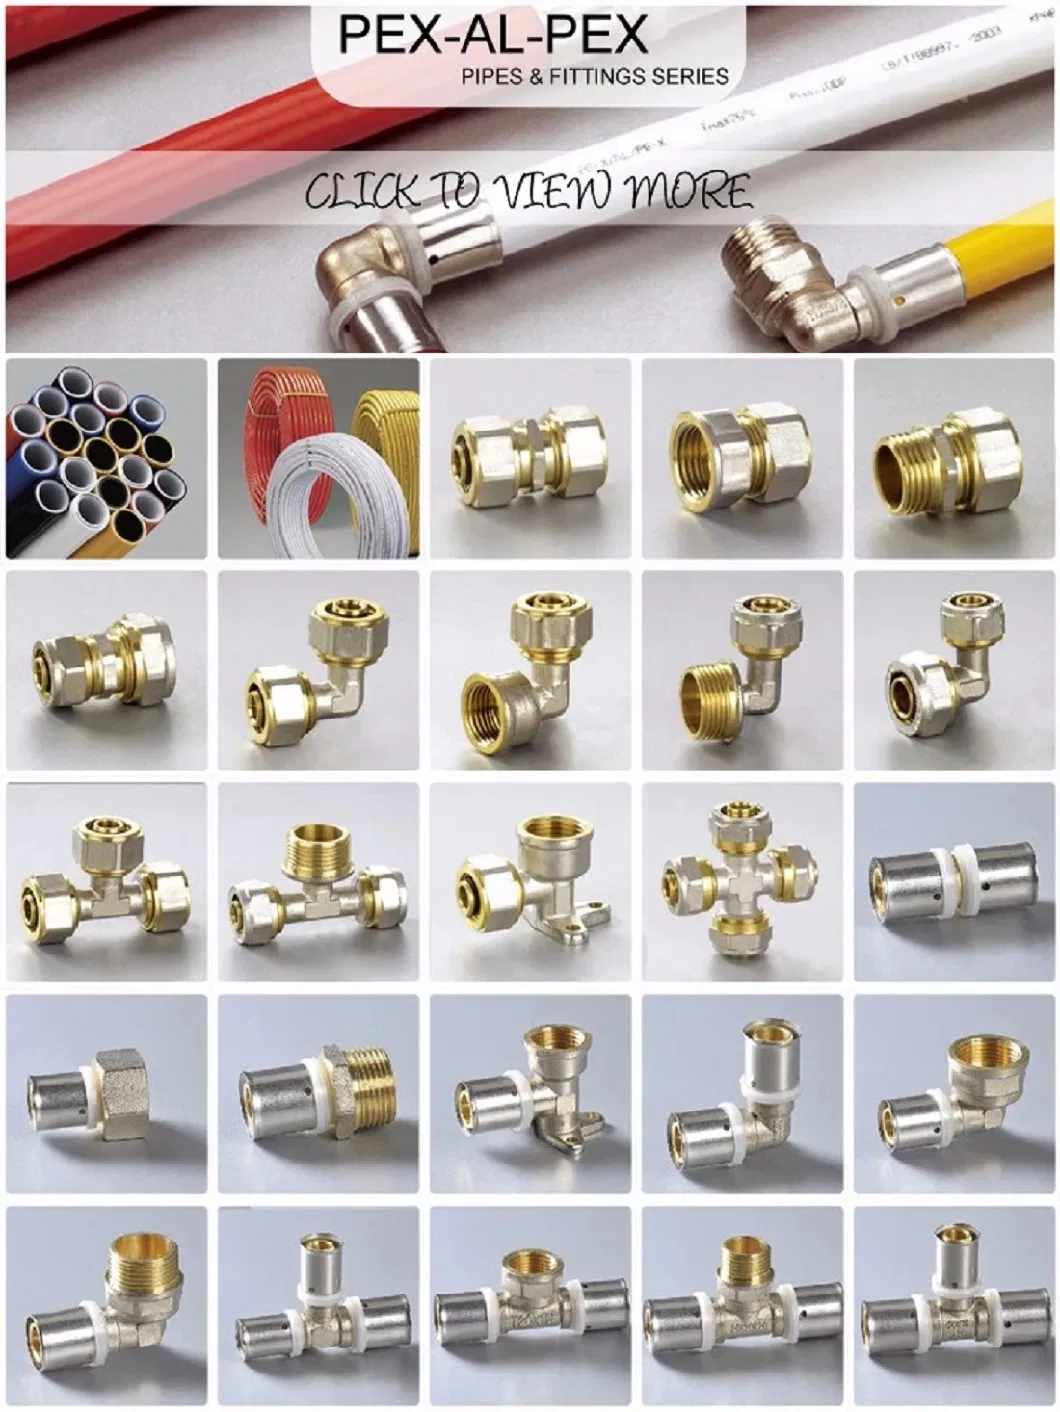 Equal Elbow Connector for Pex-Al-Pex Pipe Compression Brass Fittings